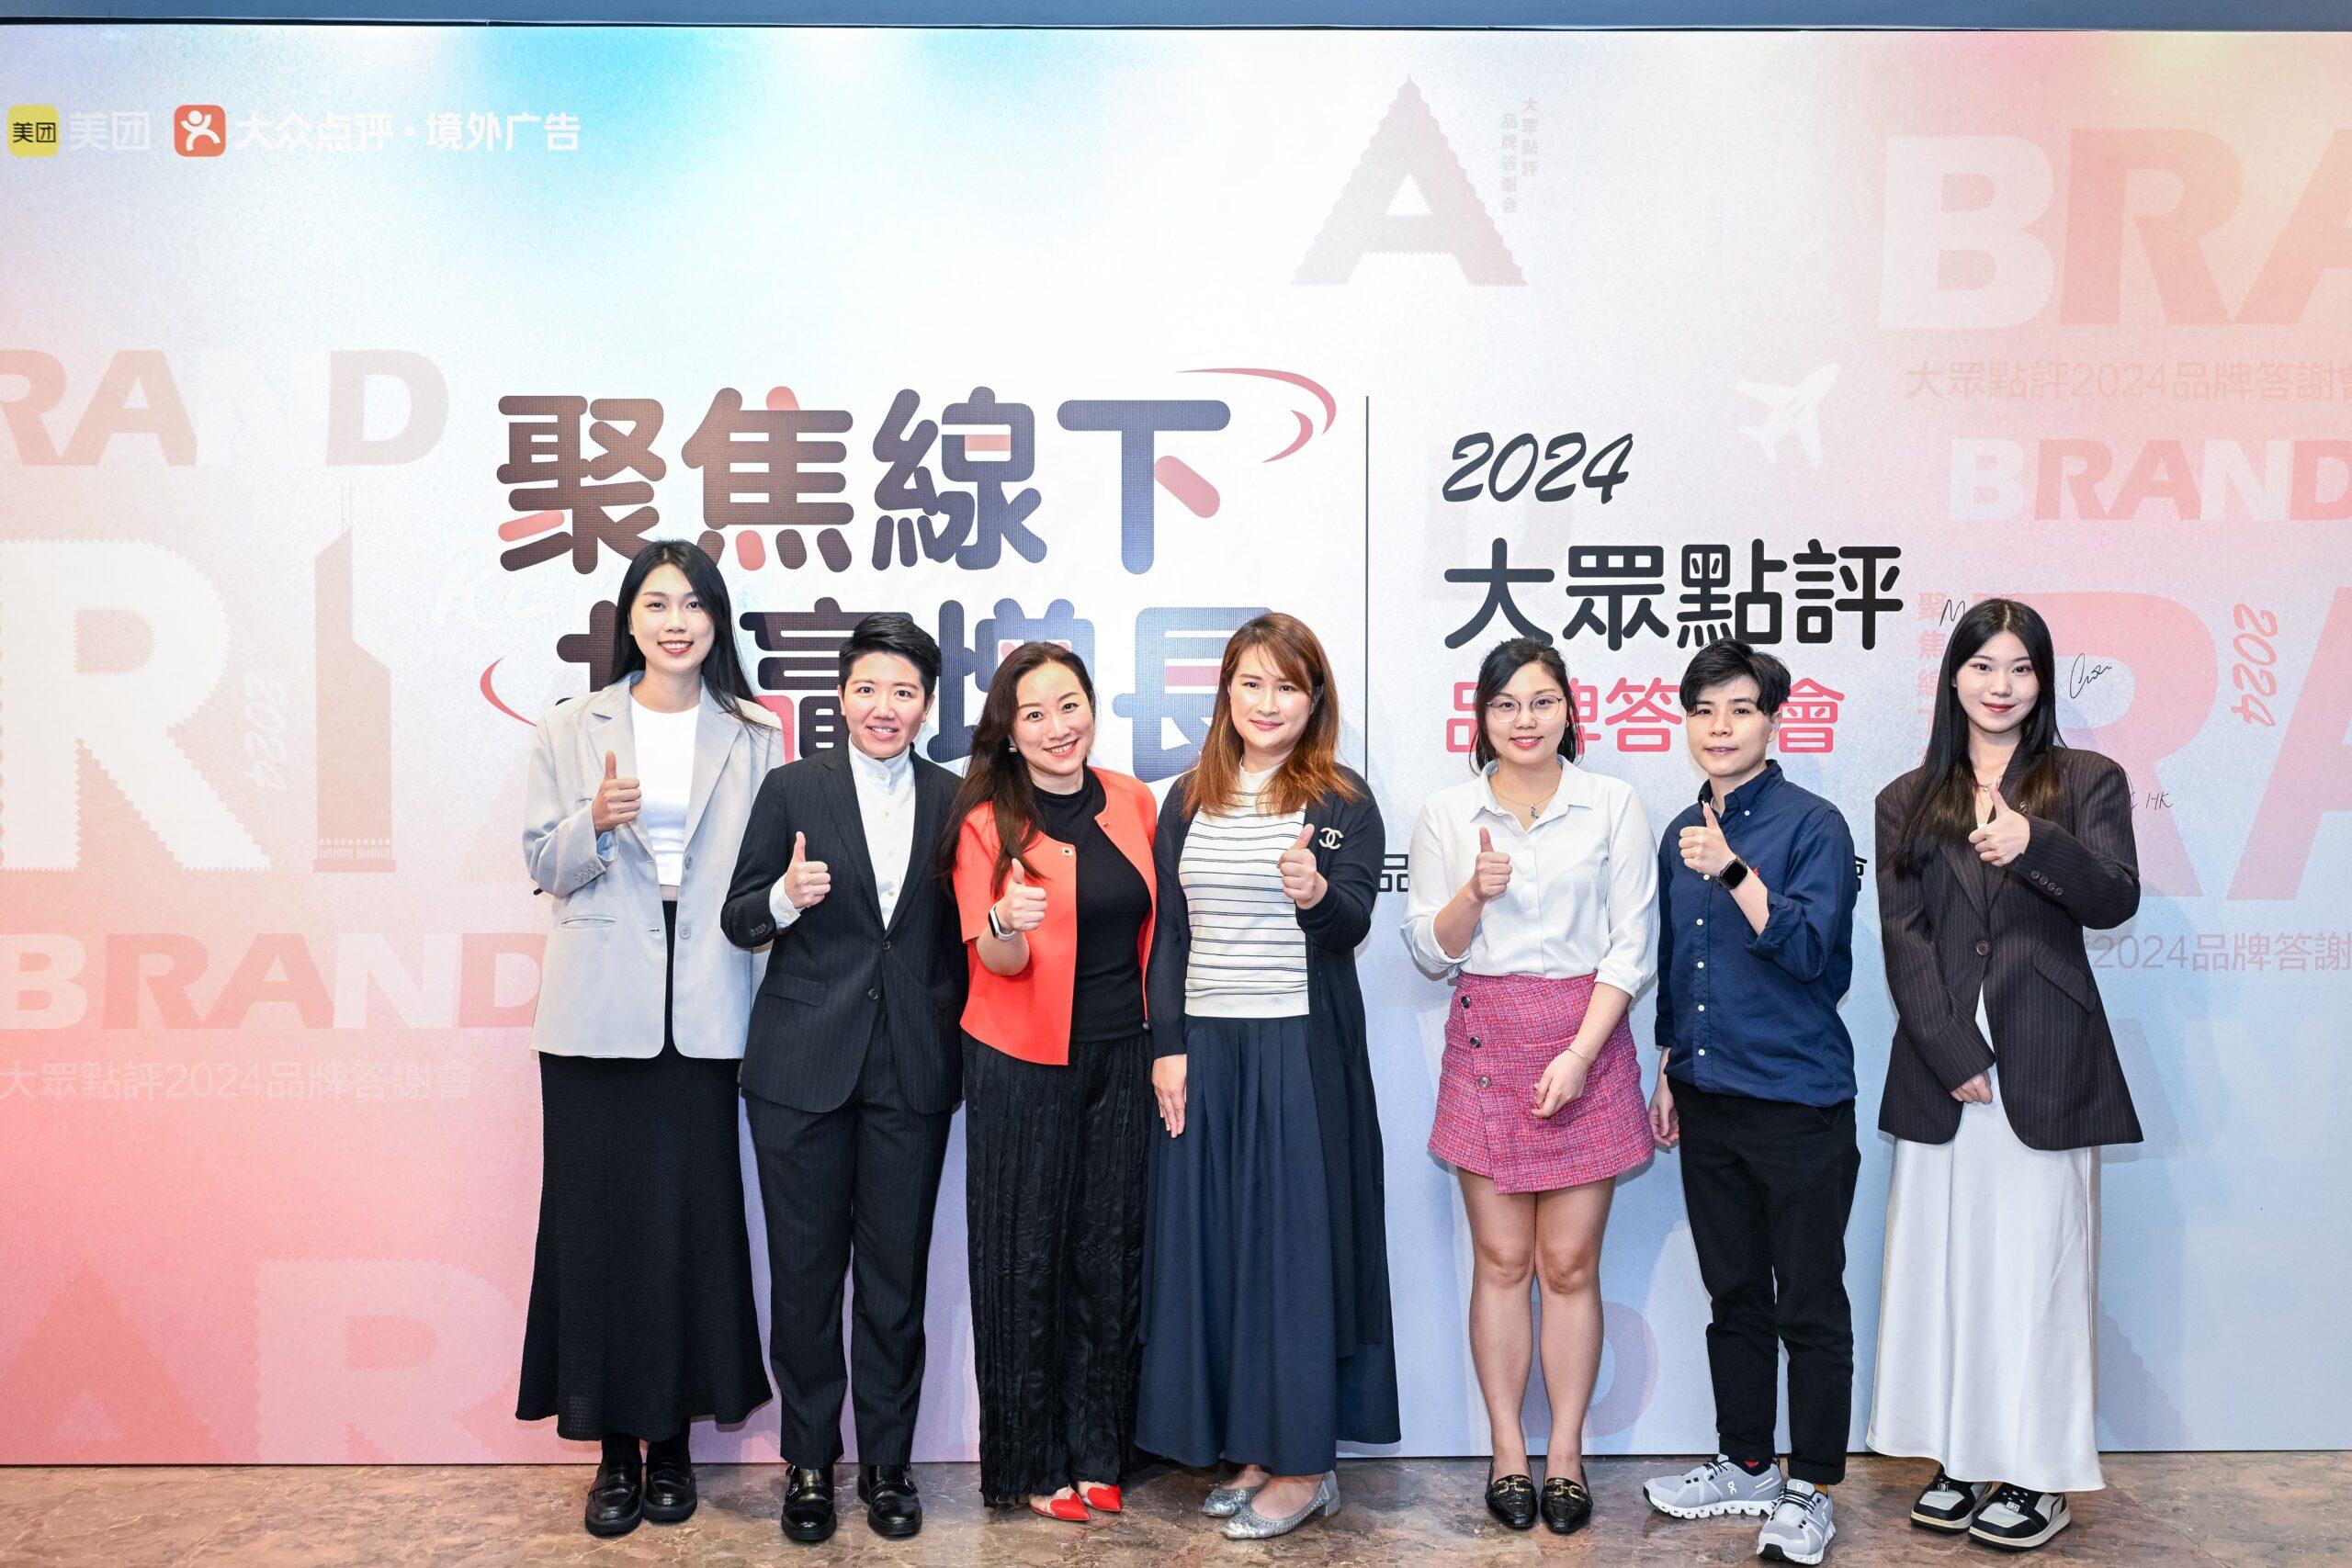 iClick Recognized as Excellent Agency at Meituan Dianping Client Event in 2024 (for JP Market)